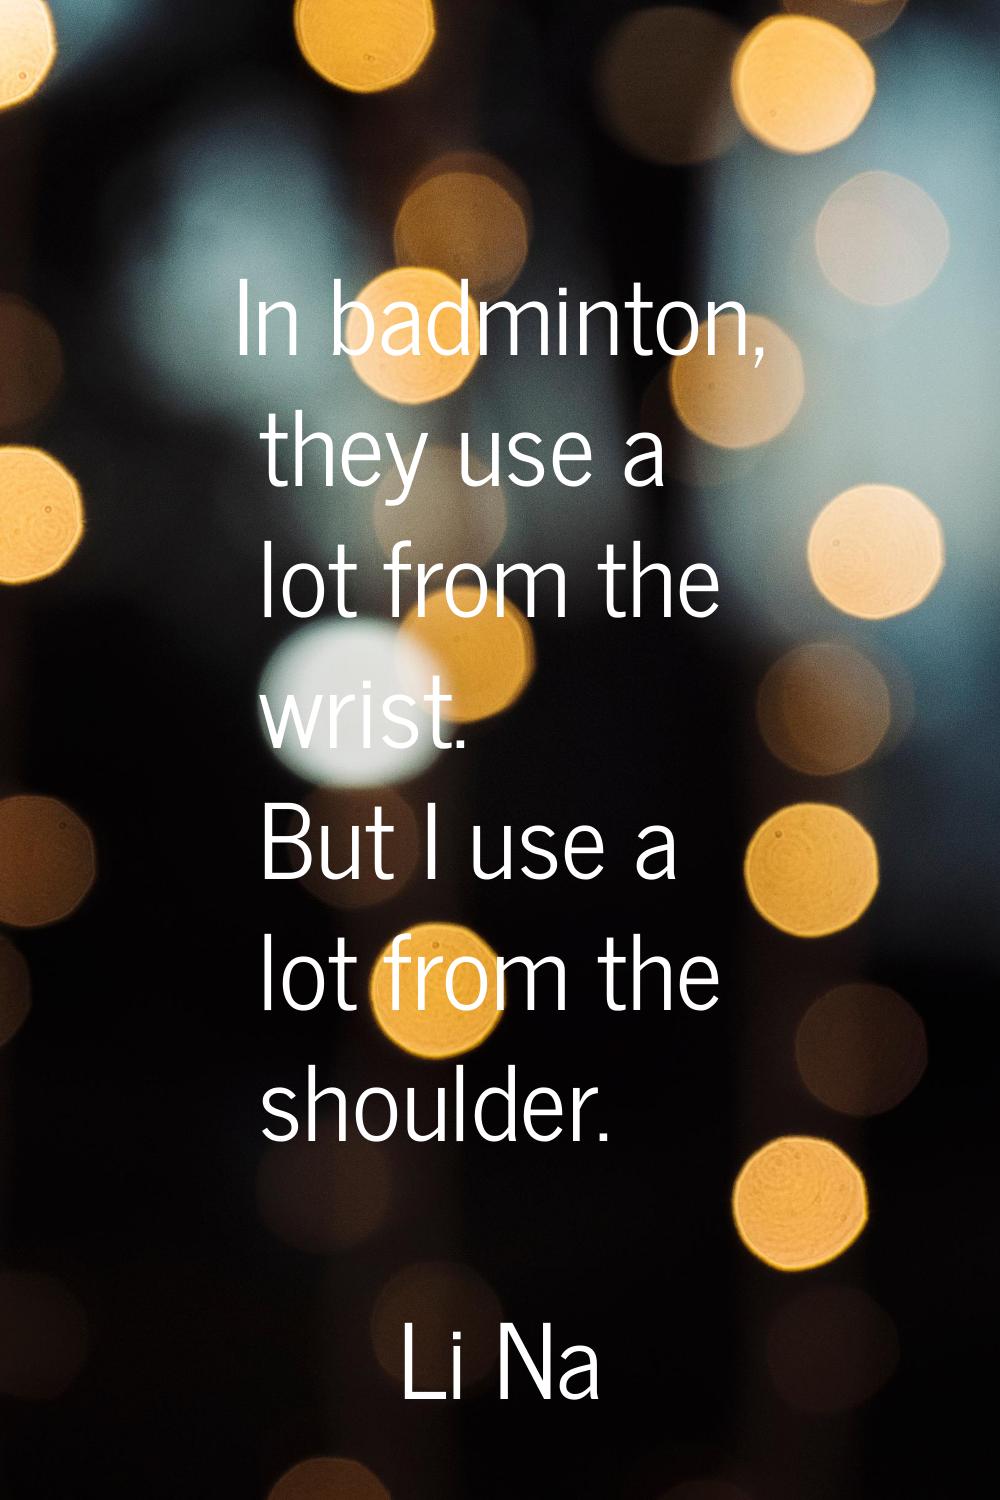 In badminton, they use a lot from the wrist. But I use a lot from the shoulder.